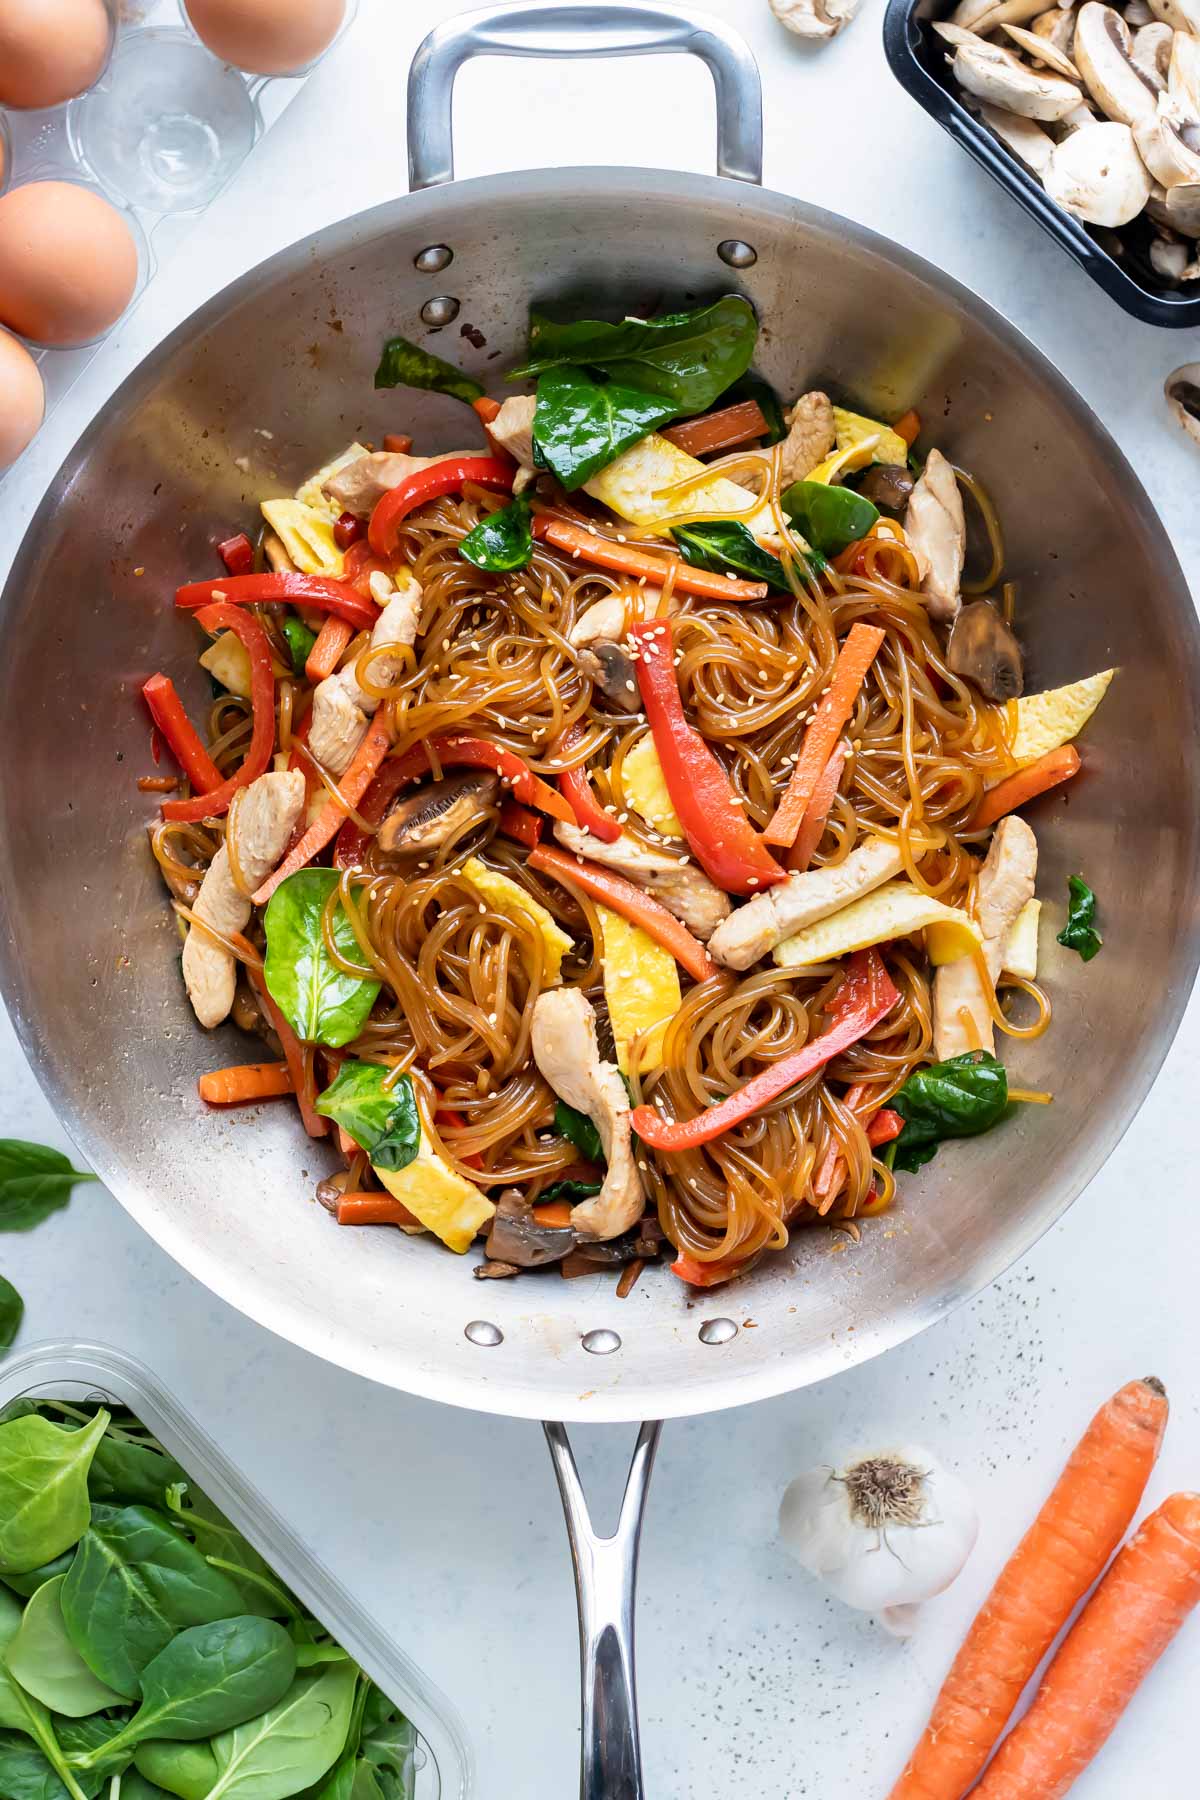 All the ingredients are combined and shown in a big wok.